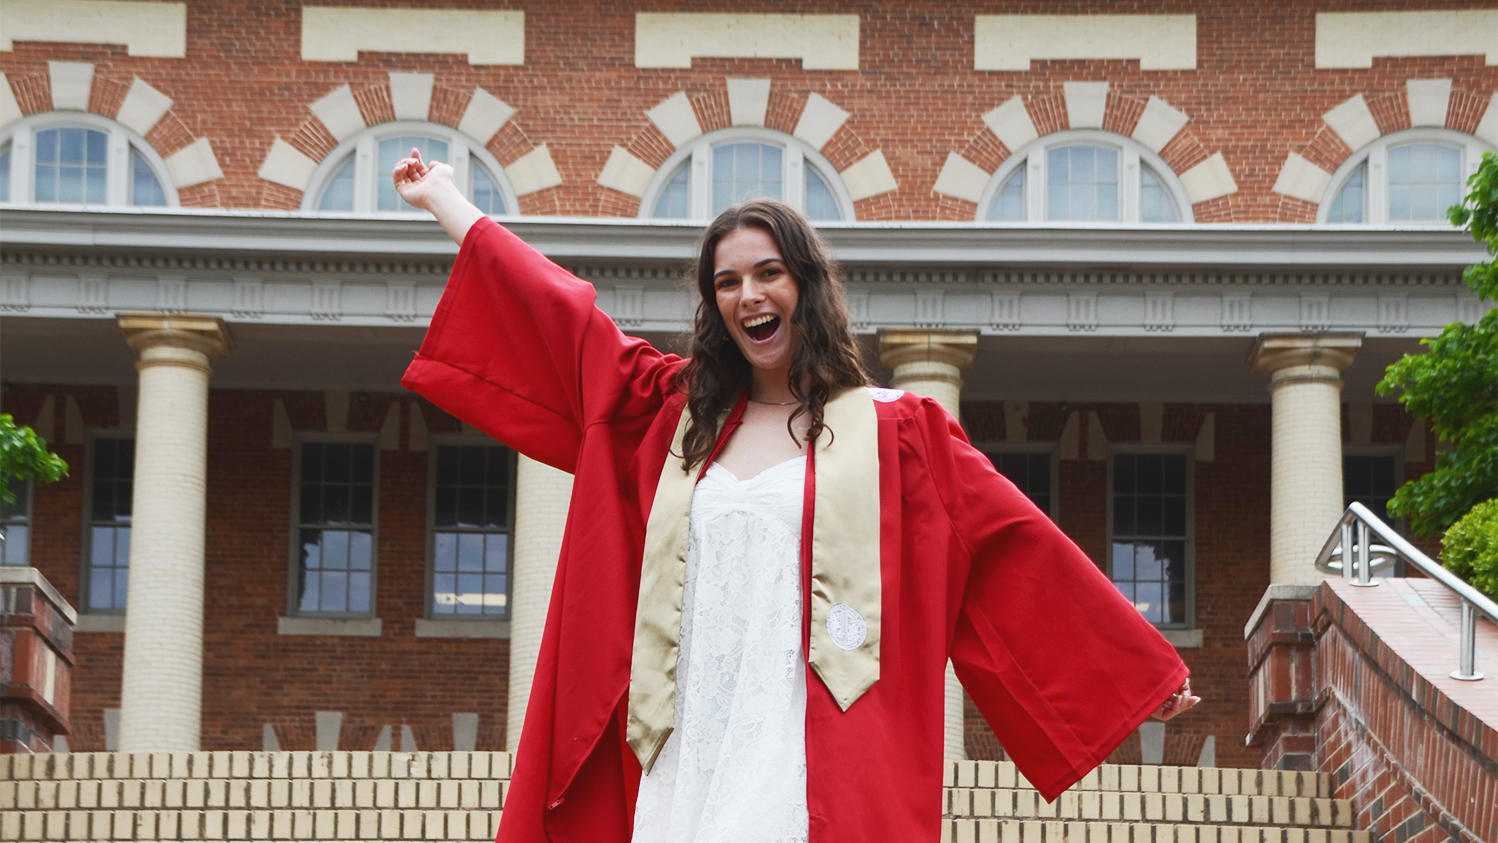 Kaia Spero, dressed in a red graduation gown and white dress, strikes a celebratory pose in front of brick building with columns.